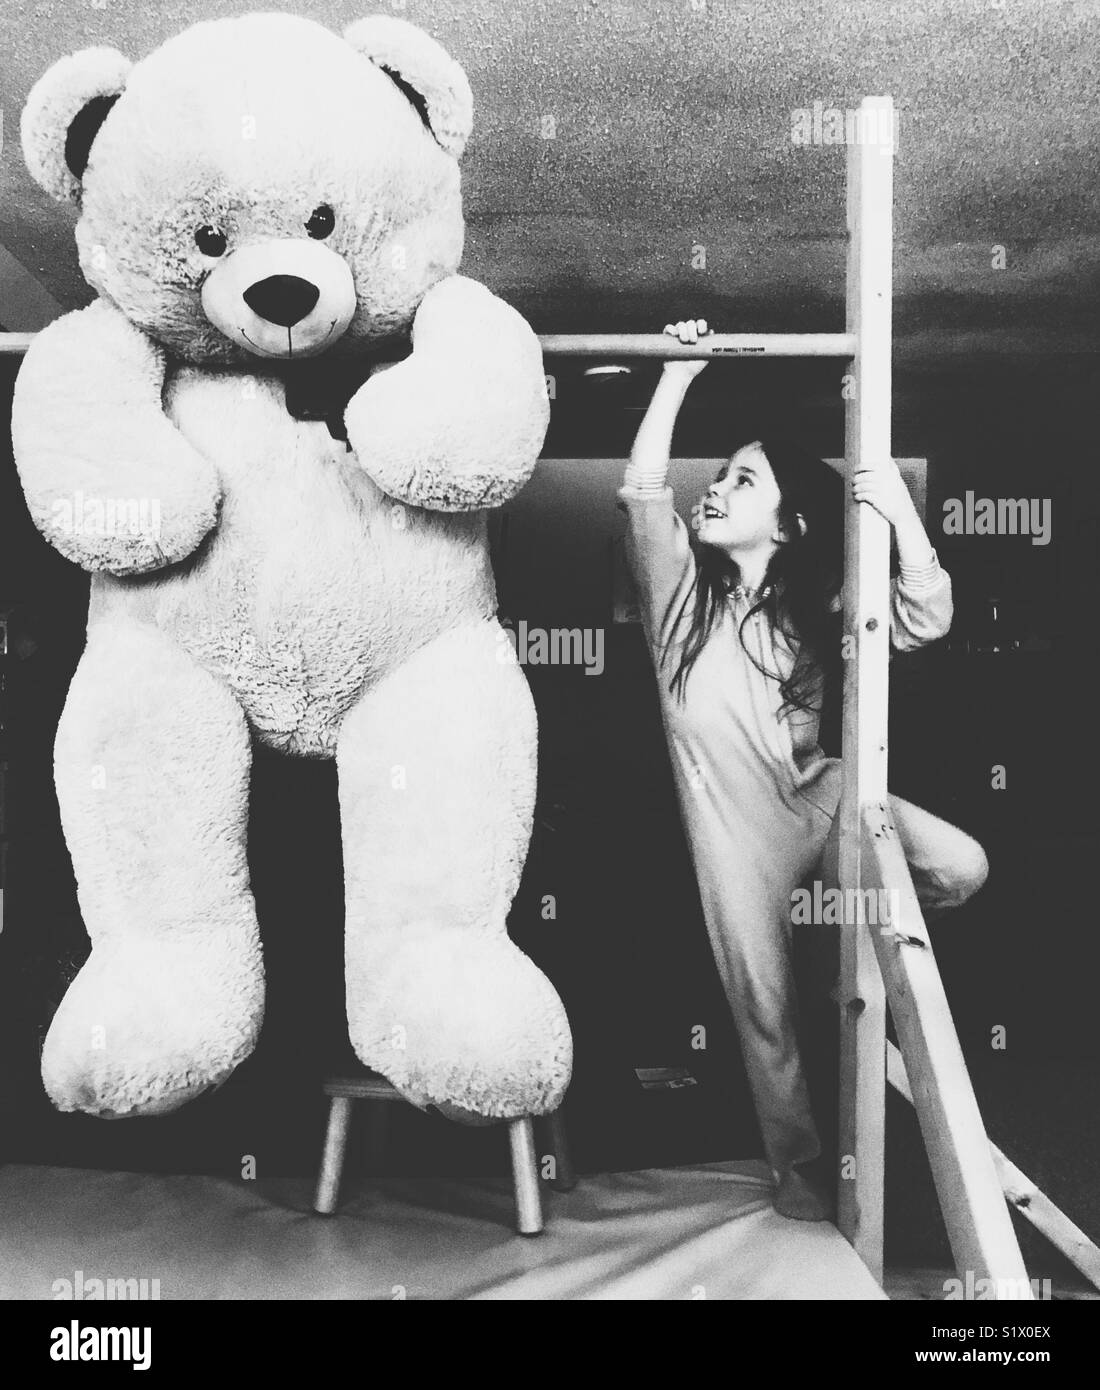 Young girl with long hair in pyjamas climbing to reach giant oversized teddy bear hanging on wooden gymnastics bar Stock Photo